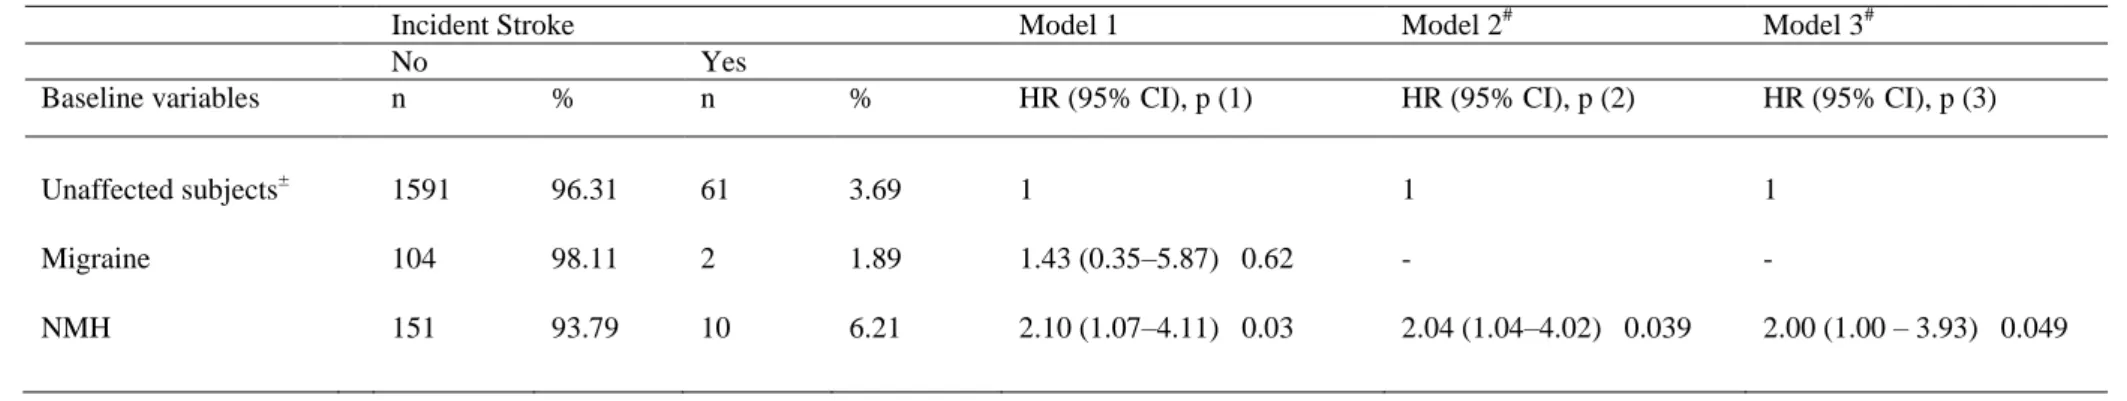 Table 3. Multi-adjusted associations of baseline migraine and NMH with incident stroke over the 12 year follow-up (N=1919)* 